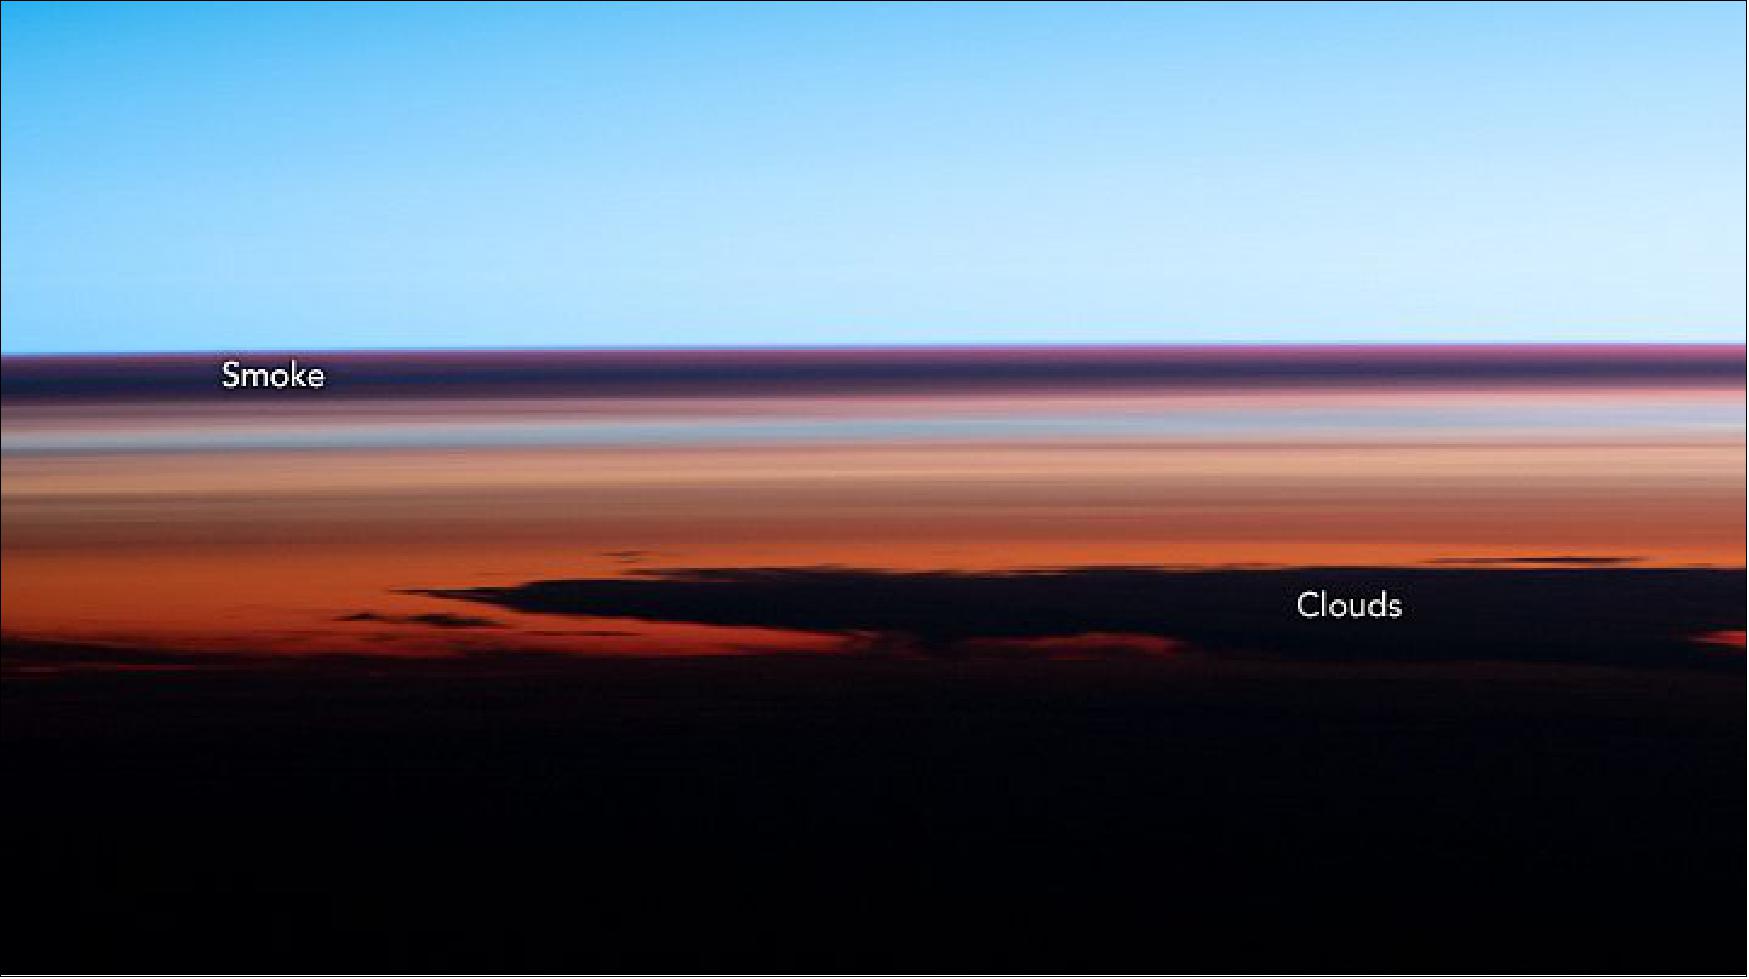 Figure 91: Astronaut photographs can be especially useful for visualizing aerosols in the stratosphere, a layer of the atmosphere that begins roughly 7 km (4 miles) above the surface near the poles and 20 km above the surface closer to equator. "One of the key things about limb photographs like this is that they can tell us the vertical distribution of aerosol plumes," said Vernier (image credit; NASA Earth Observatory)